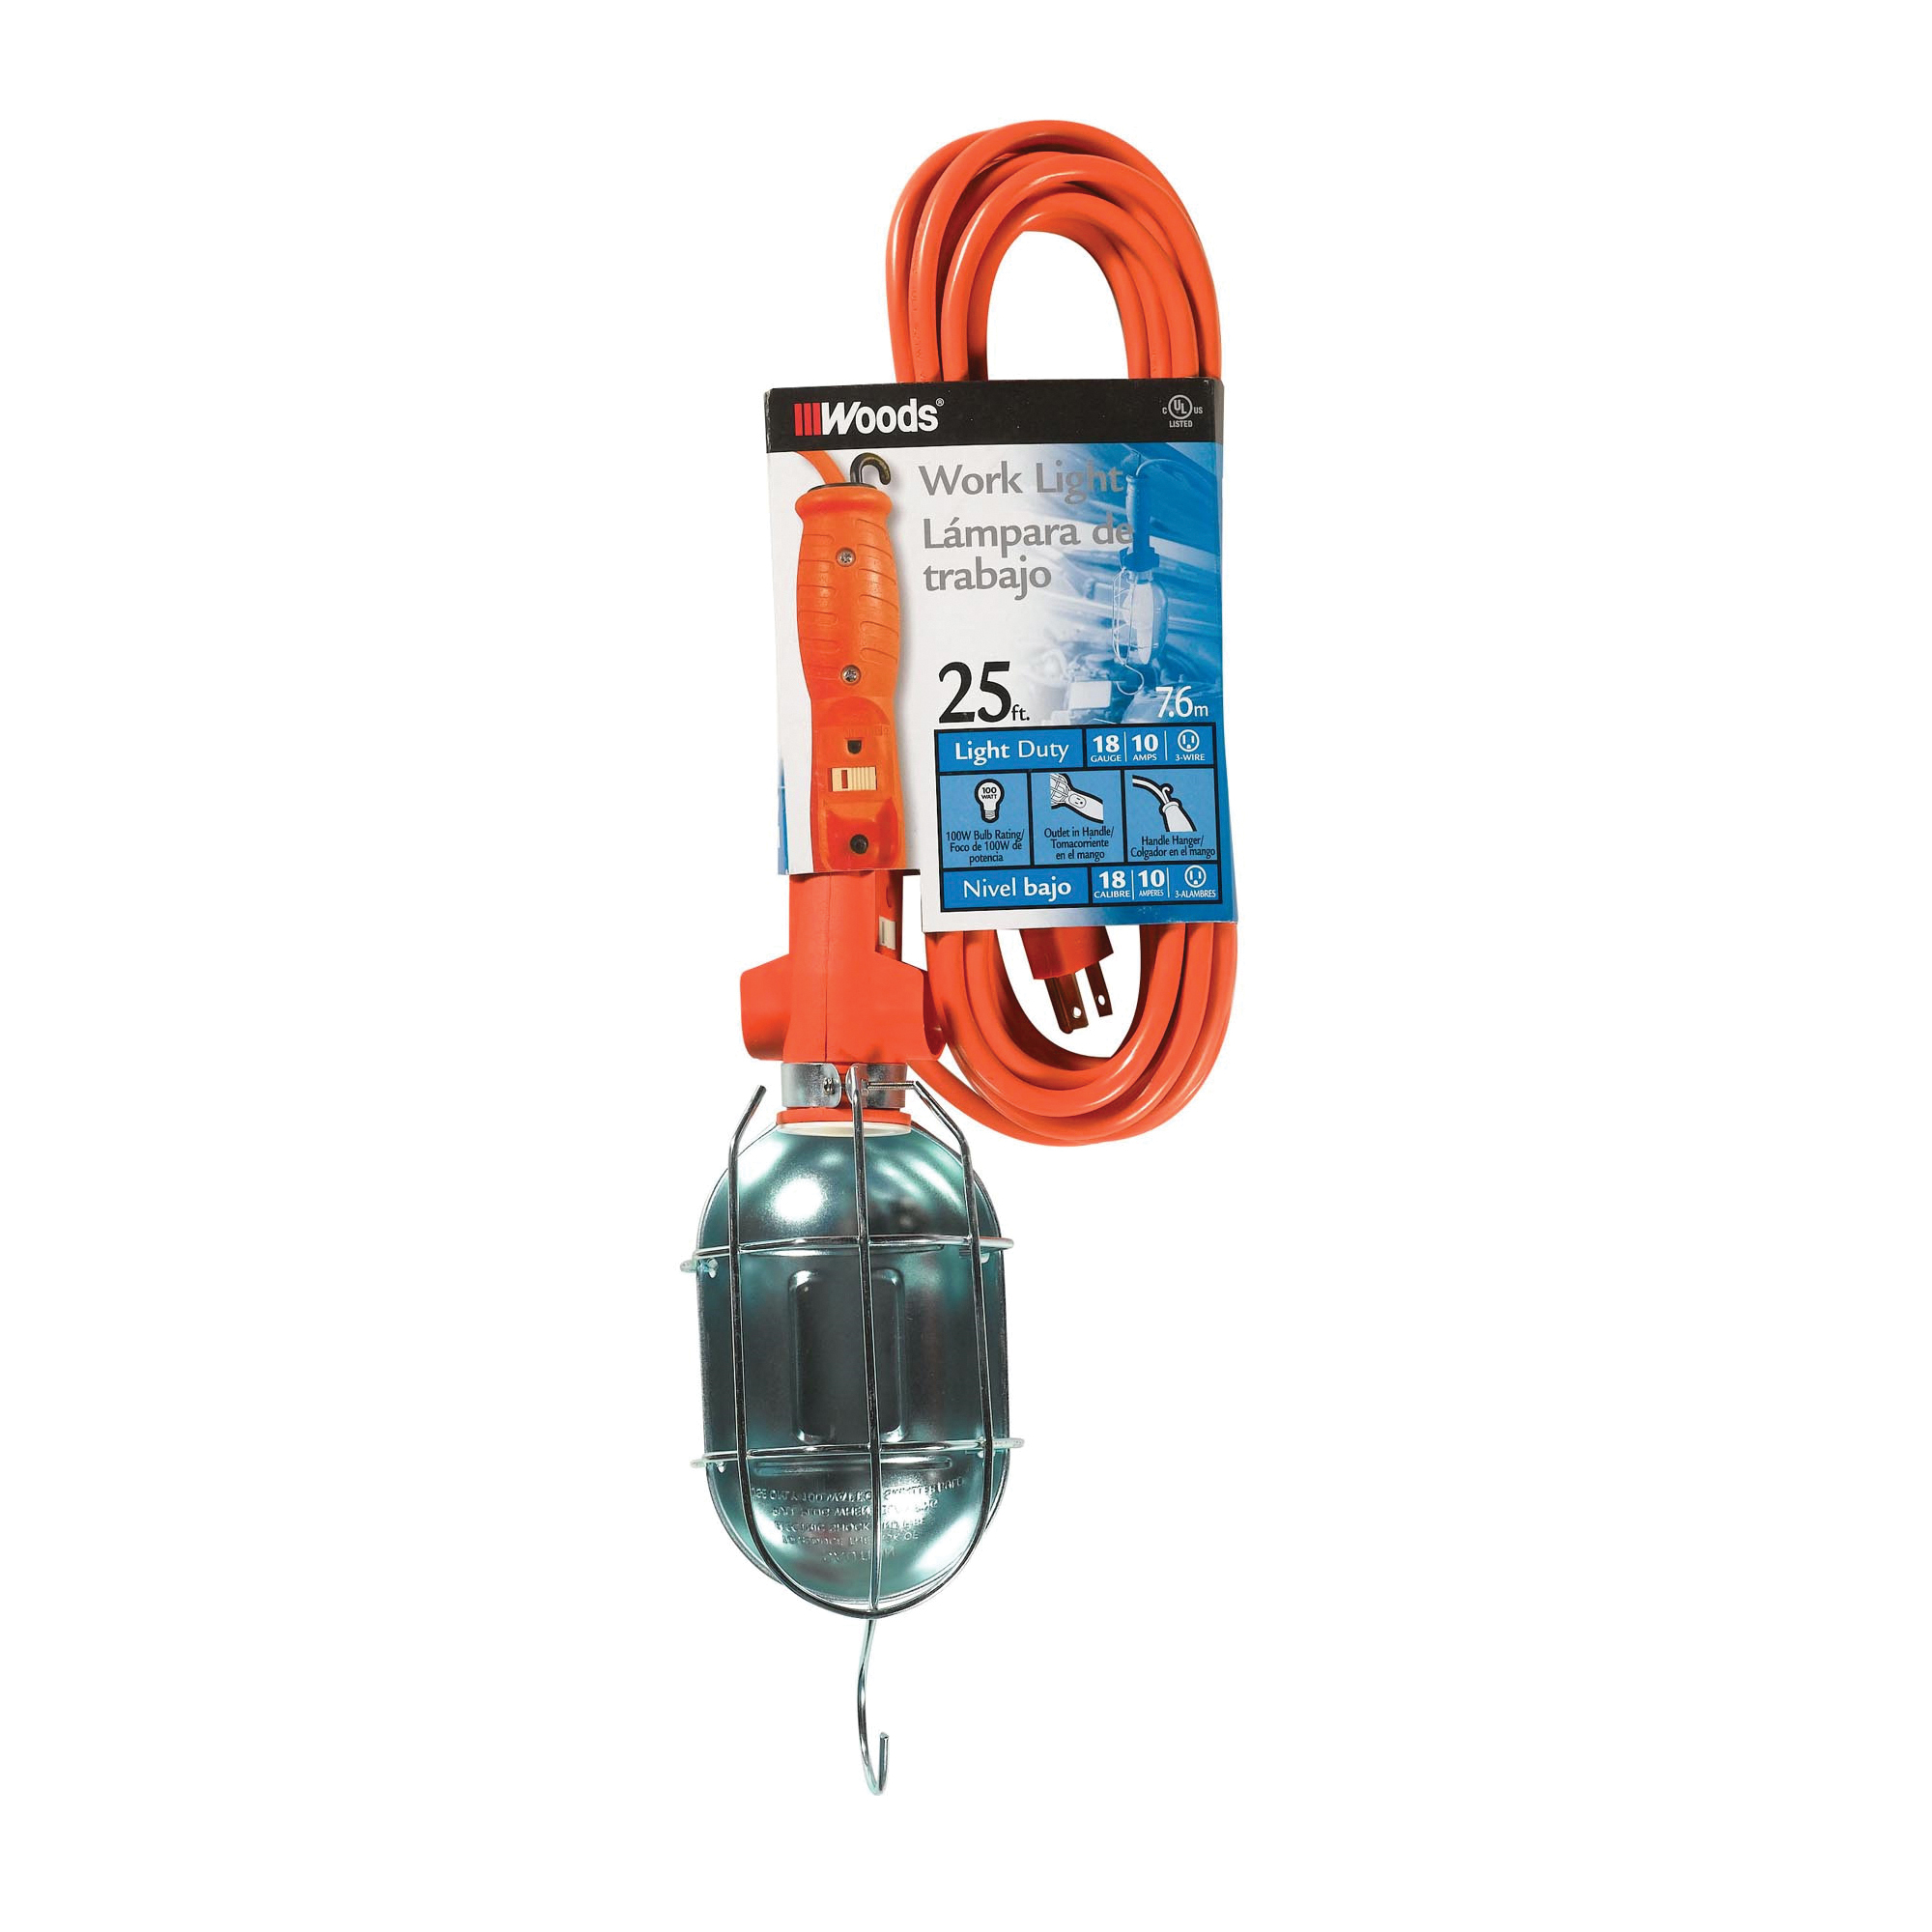 0681 Work Light with Outlet and Metal Guard, 9 A, 120 V, Orange